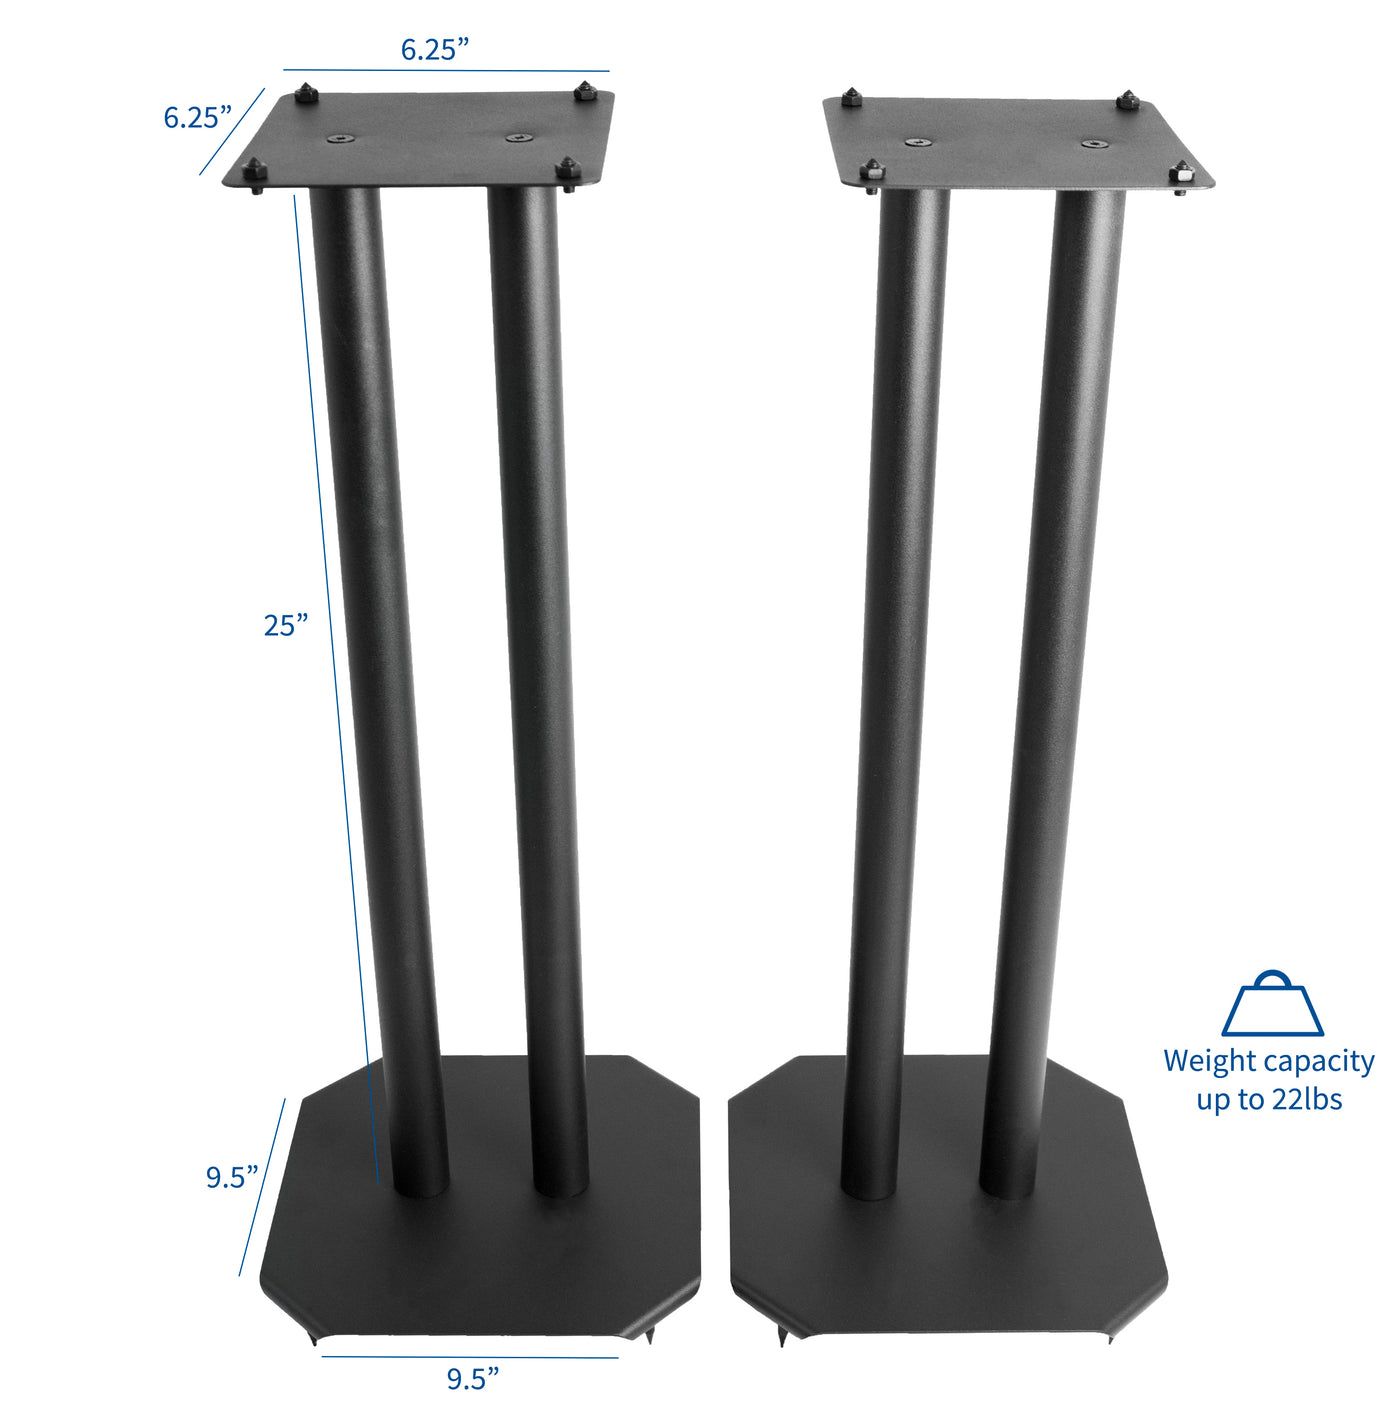 Surround sound speaker stands with a 25-inch lift.